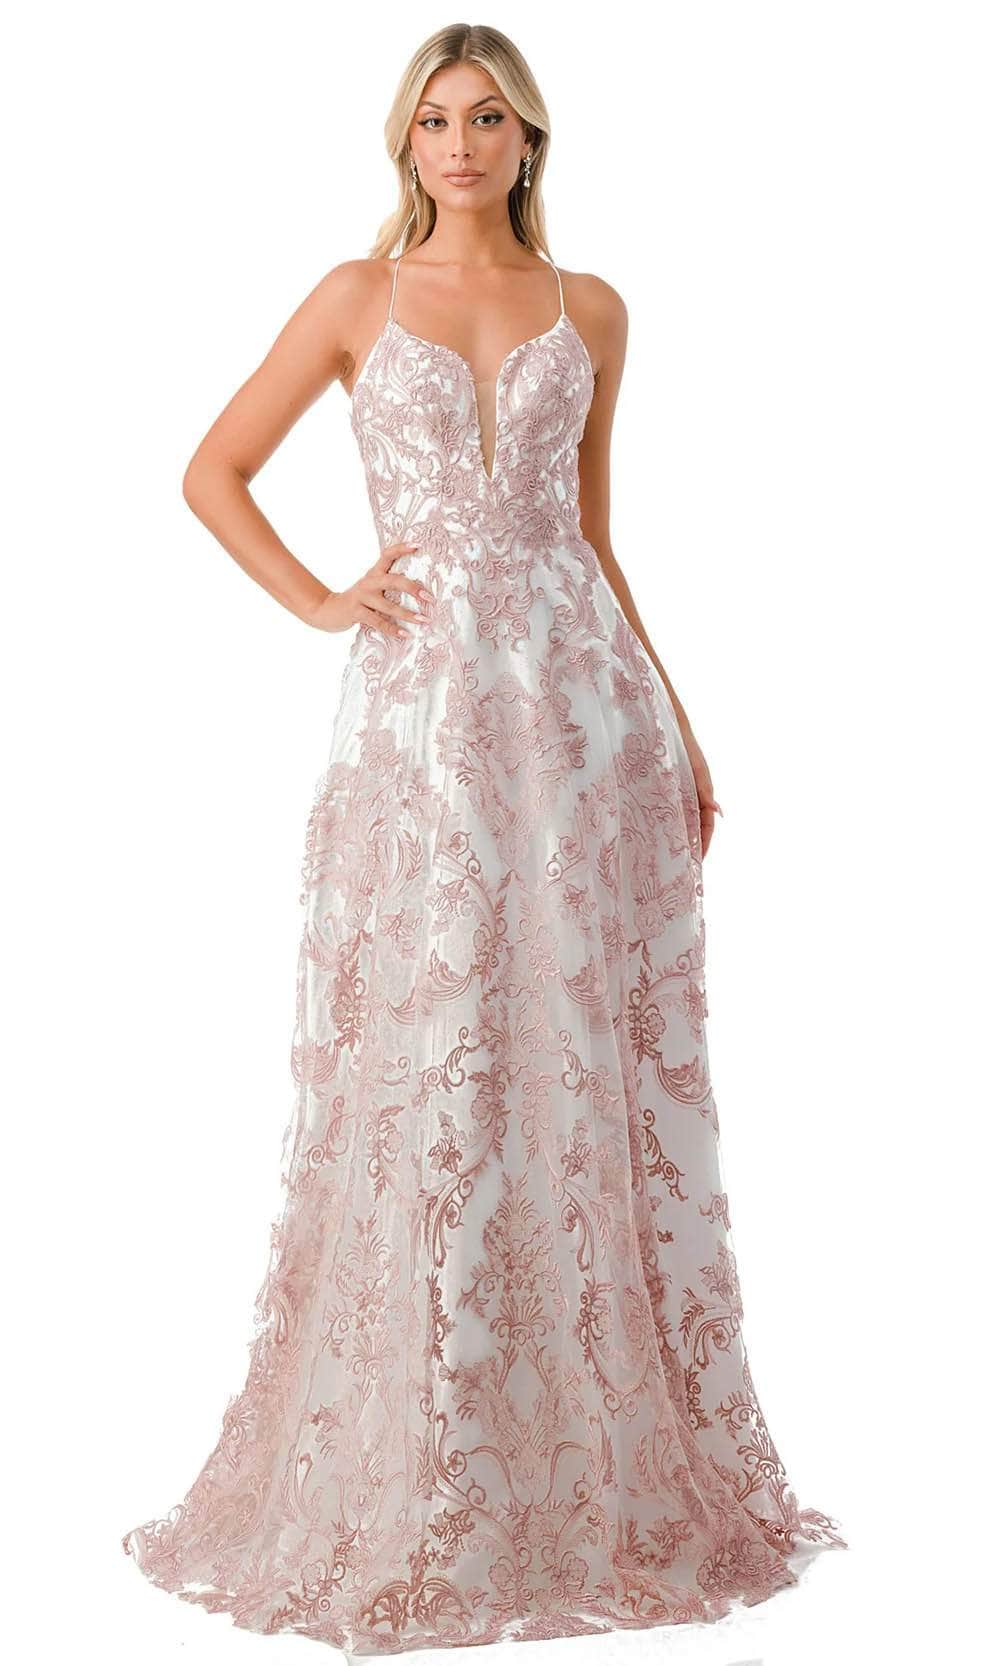 Image of Aspeed Design P2208 - Embroidered A-Line Prom Dress